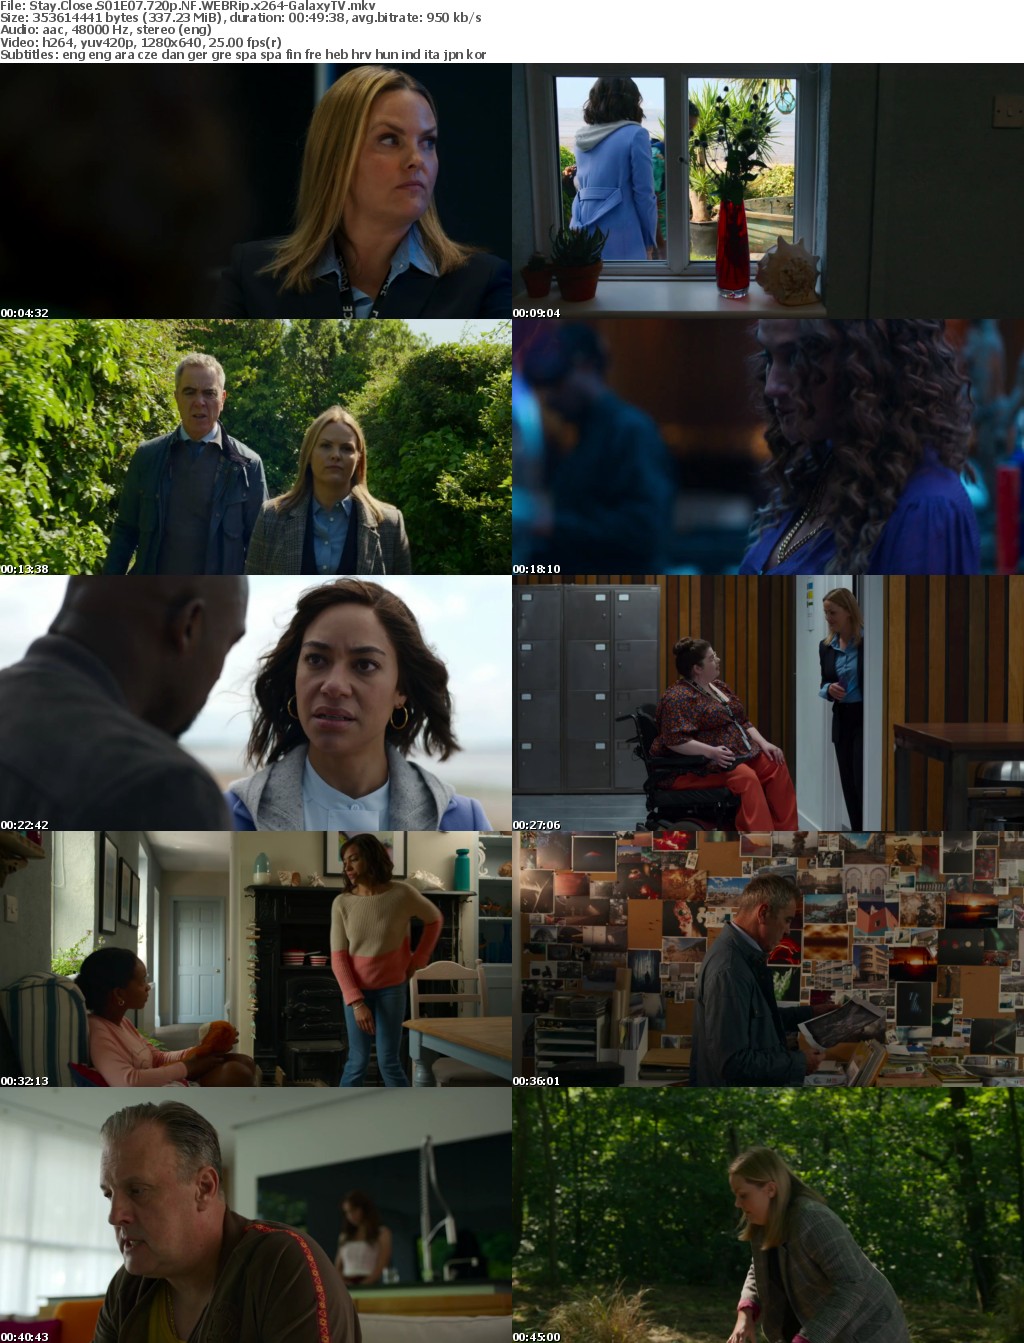 Stay Close S01 COMPLETE 720p NF WEBRip x264-GalaxyTV